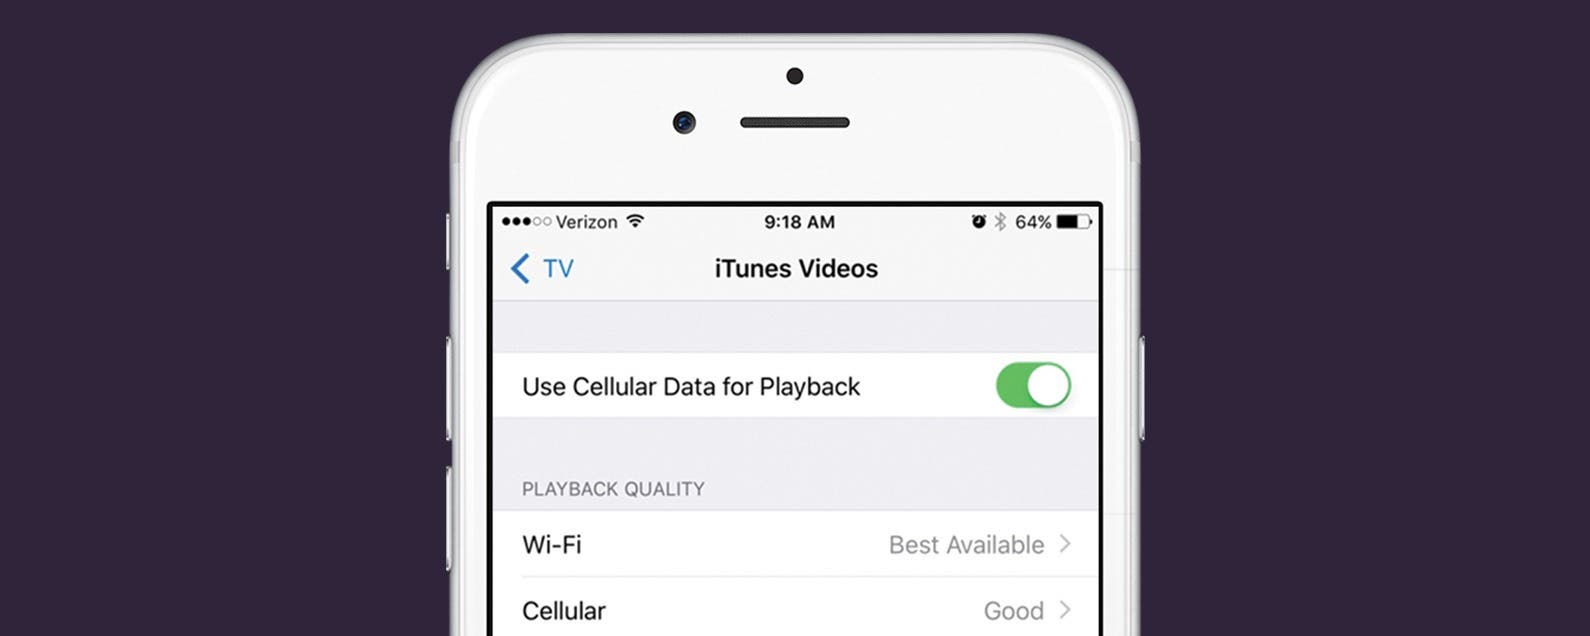 How to Use Cellular Data for Playback in the TV App on ...